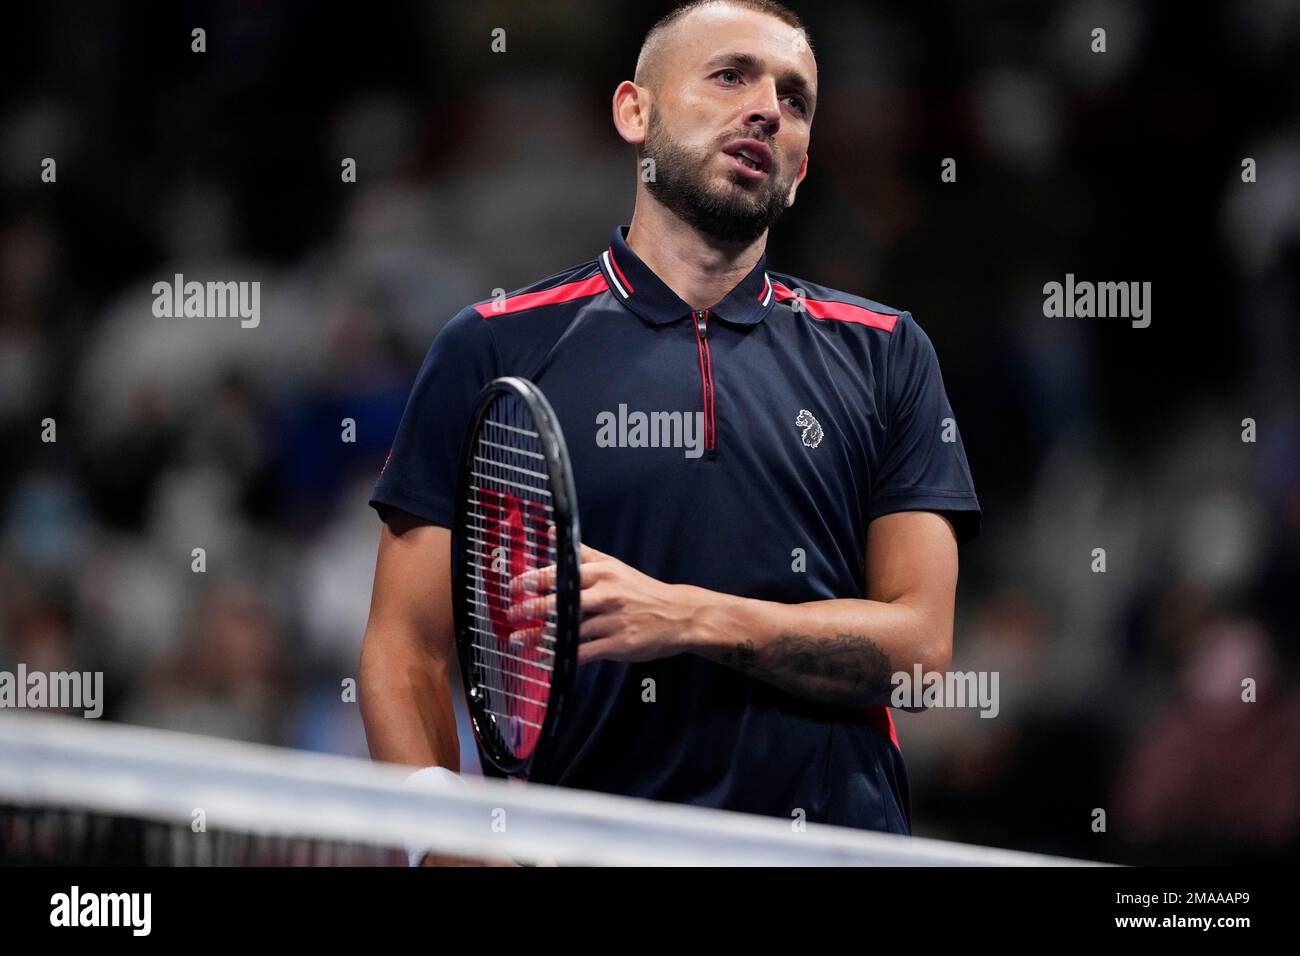 Daniel Evans of Britain reacts after losing a point against Miomir Kecmanovic of Serbia in the Rakuten Open tennis tournament in Tokyo, Thursday, Oct